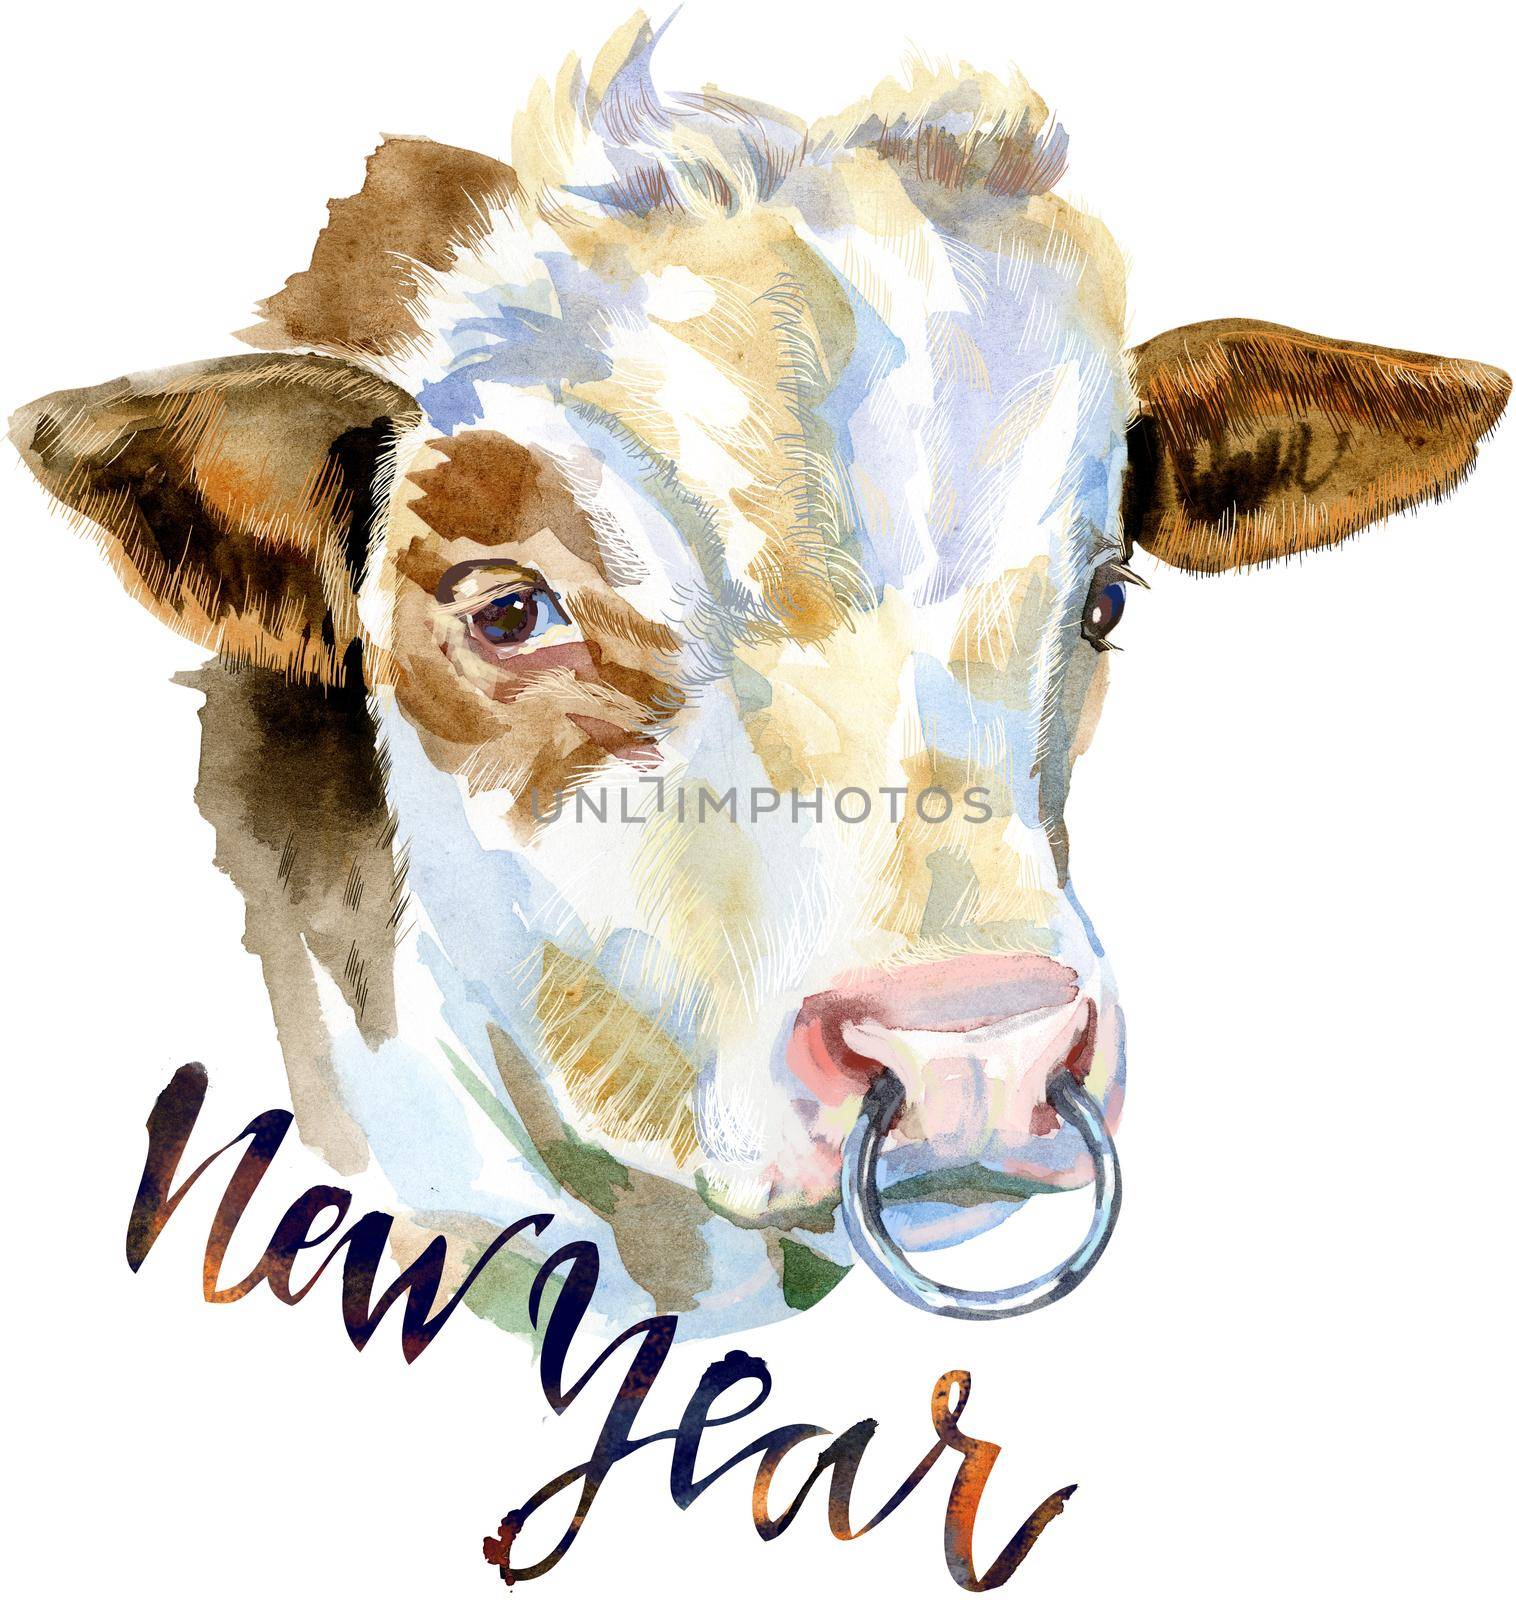 Bull with the inscription New Year. Watercolor graphics. Bull animal illustration watercolor textured background.